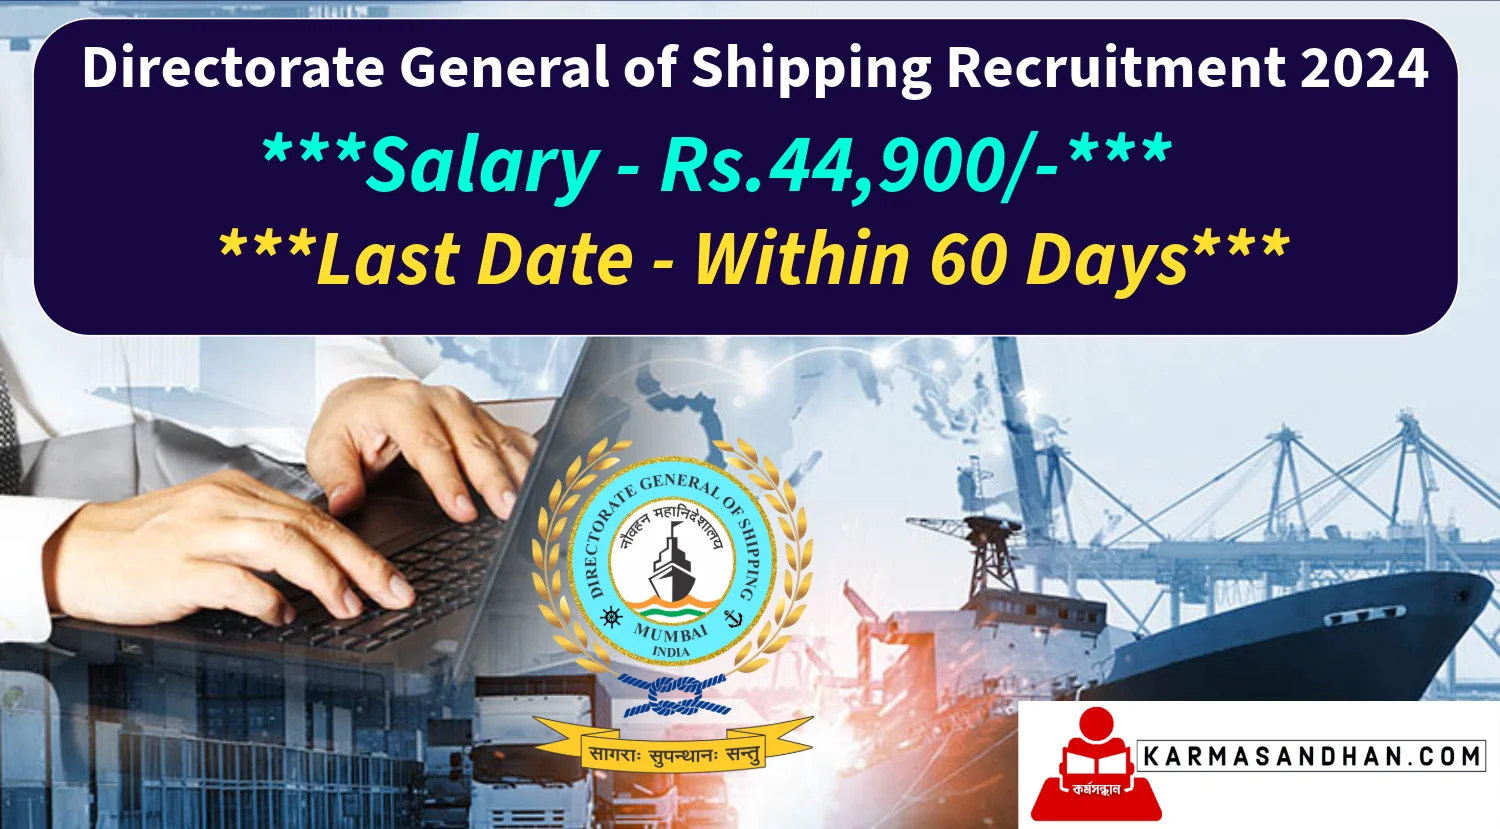 Directorate General of Shipping Recruitment 2024